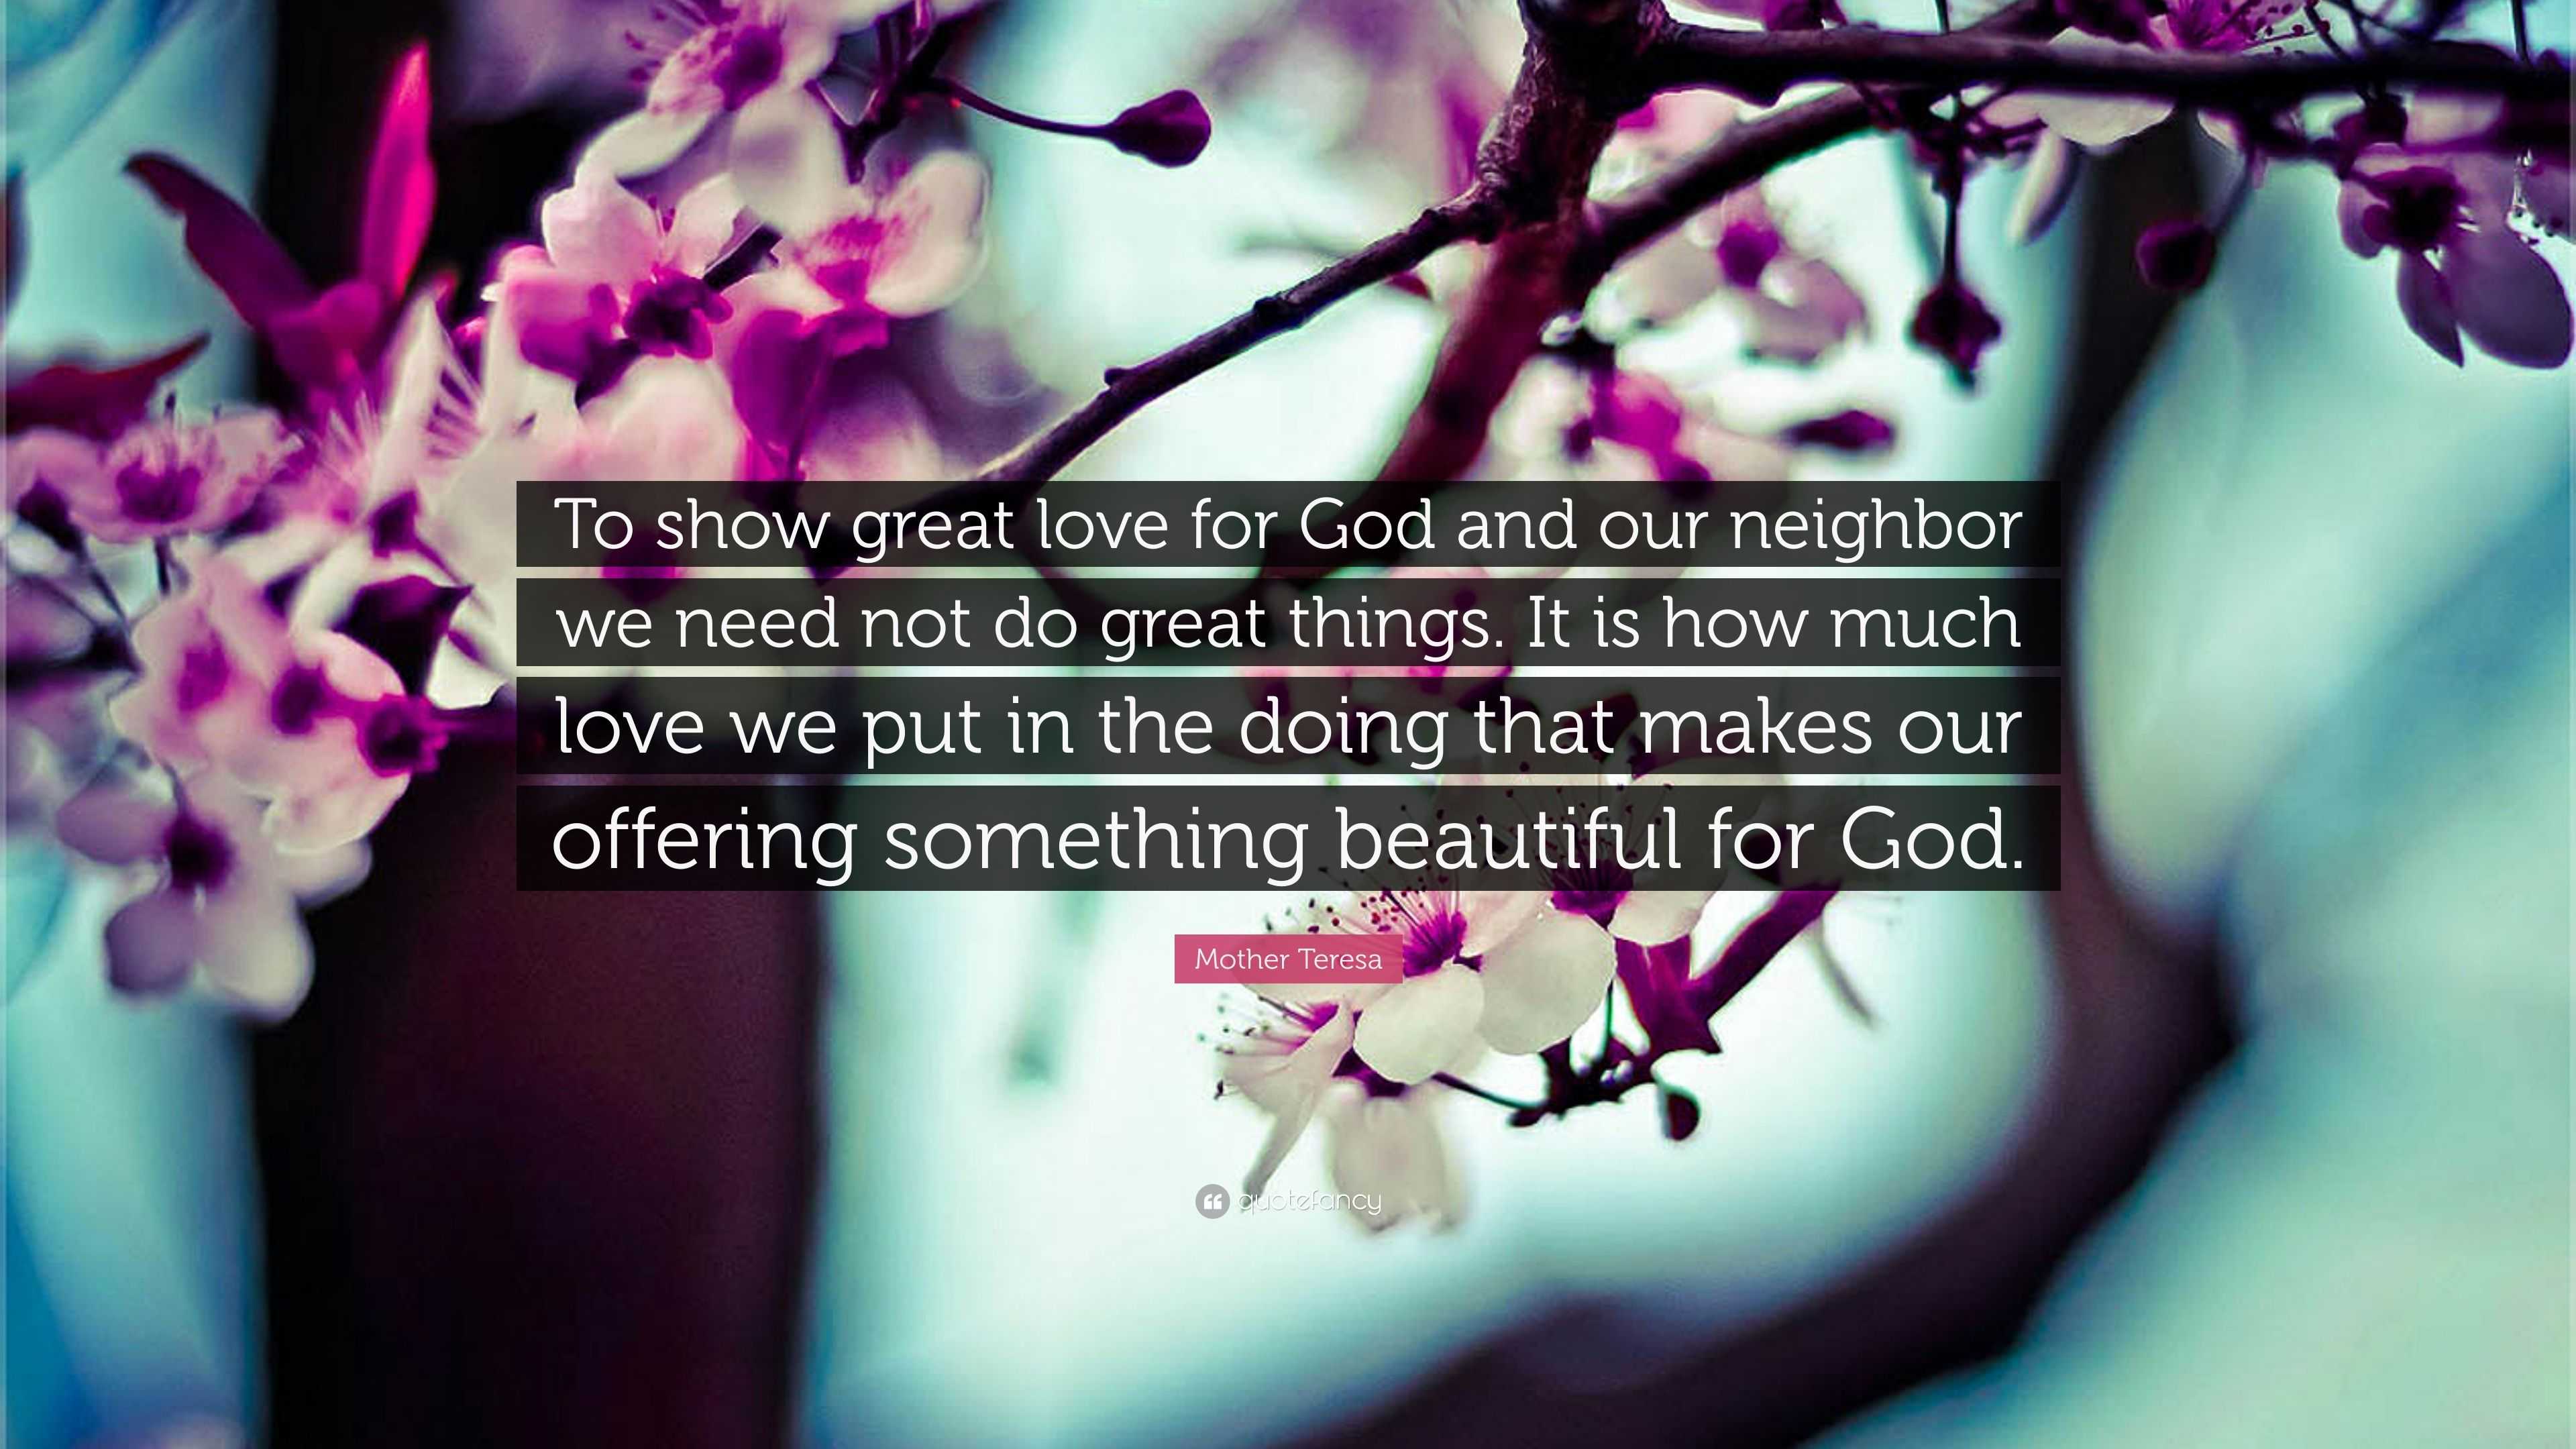 Mother Teresa Quote “To show great love for God and our neighbor we need